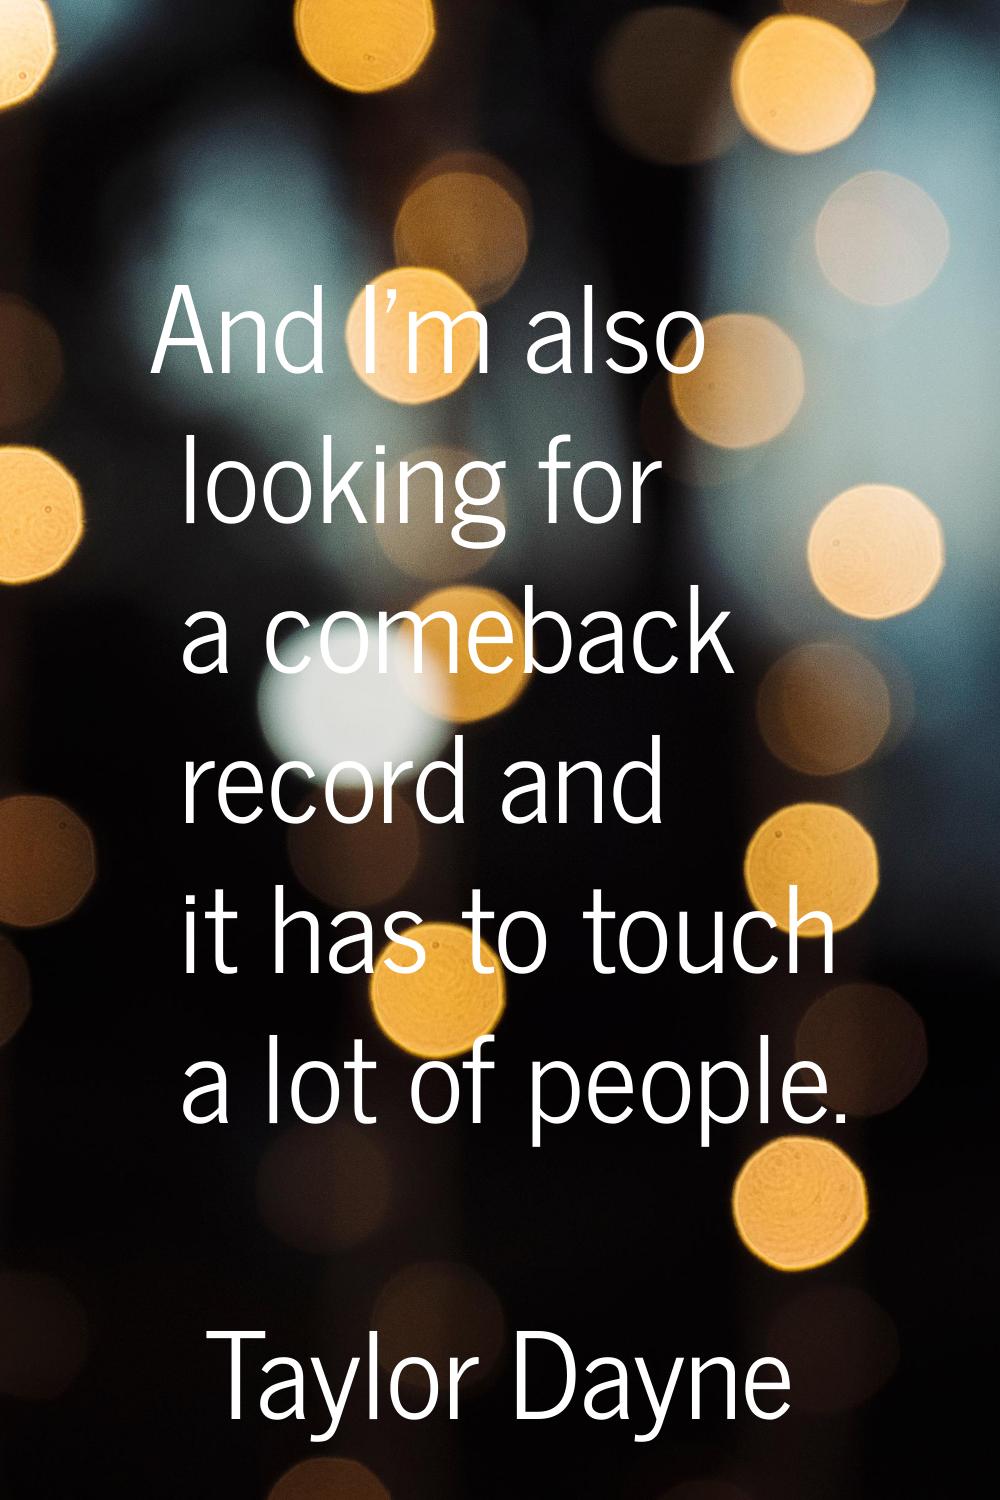 And I'm also looking for a comeback record and it has to touch a lot of people.